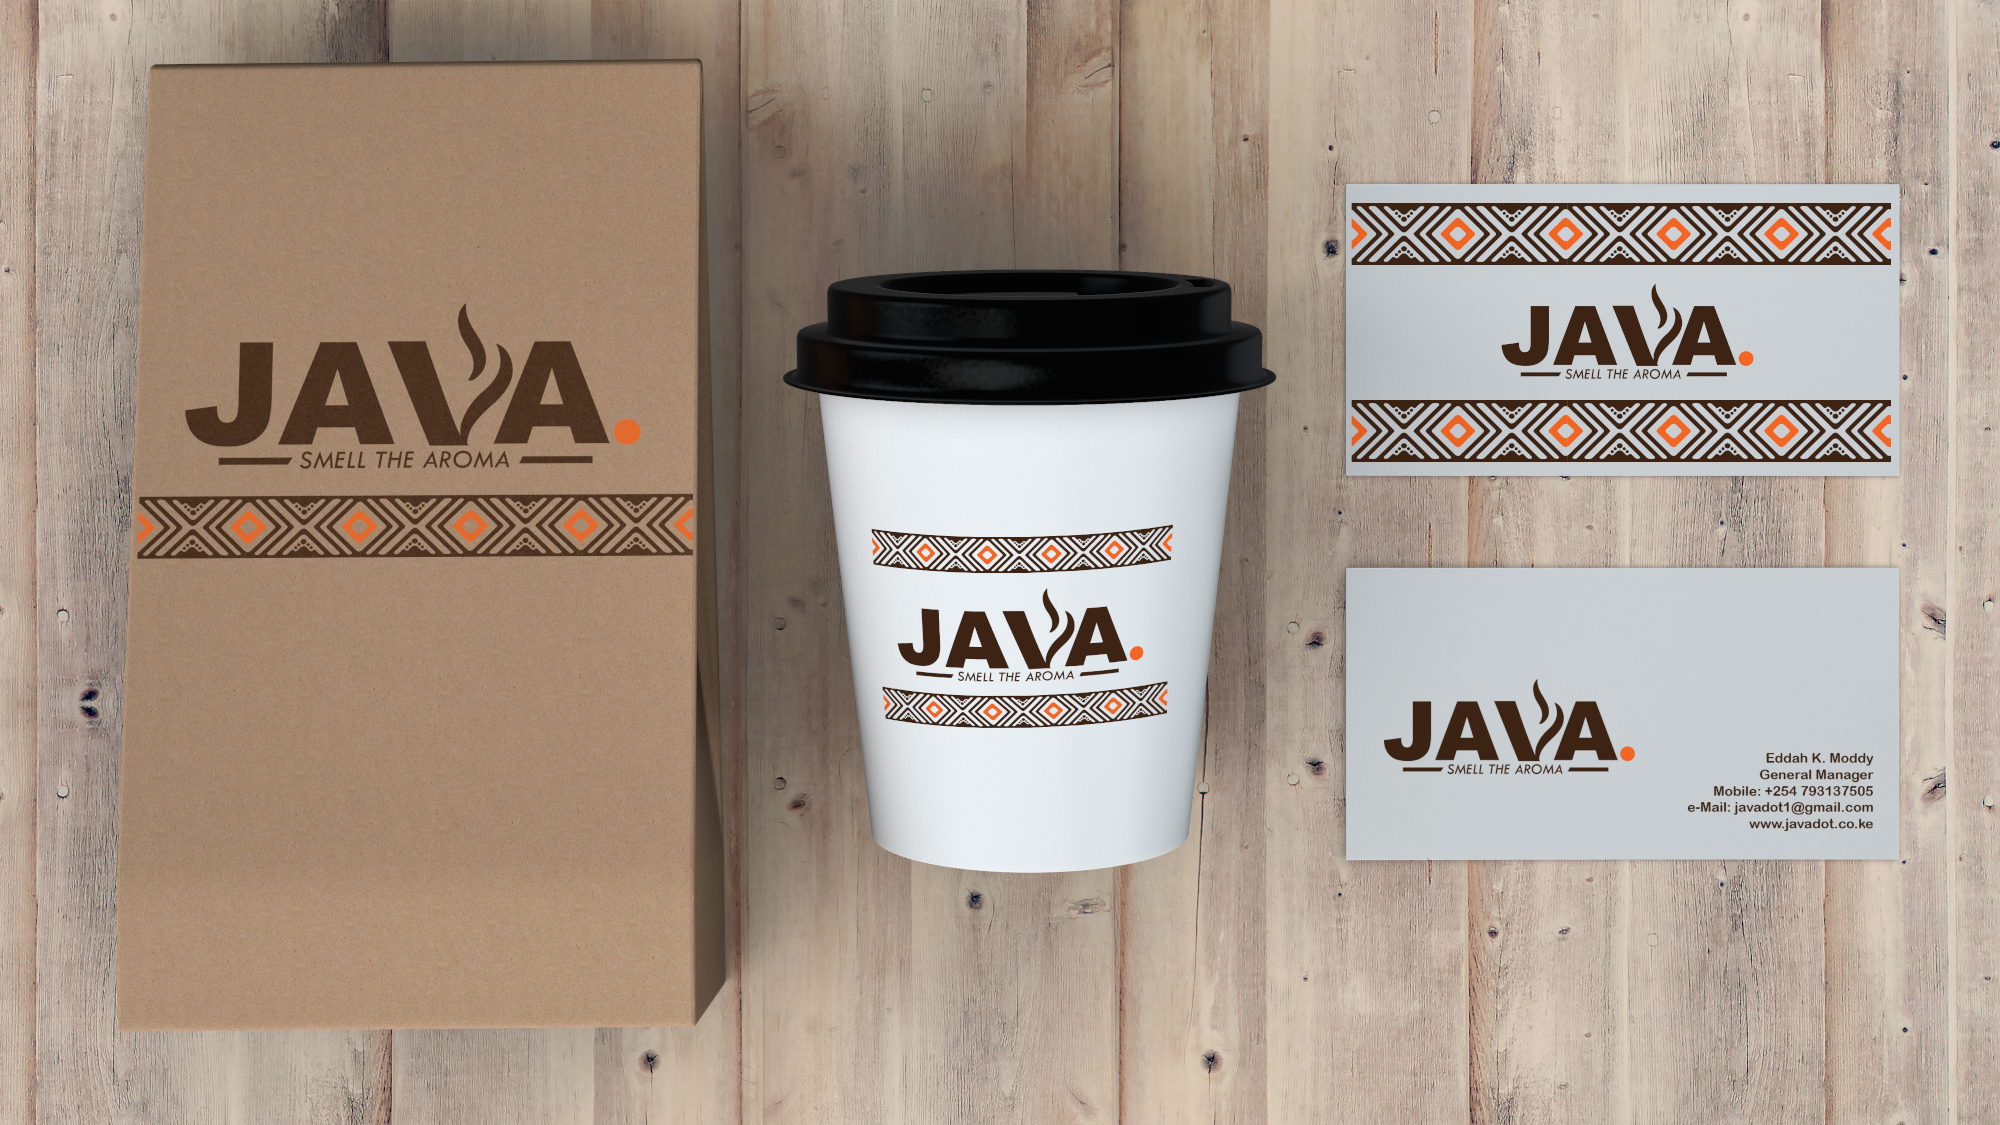 Designs for coffee brand paper bag, cup and business cards